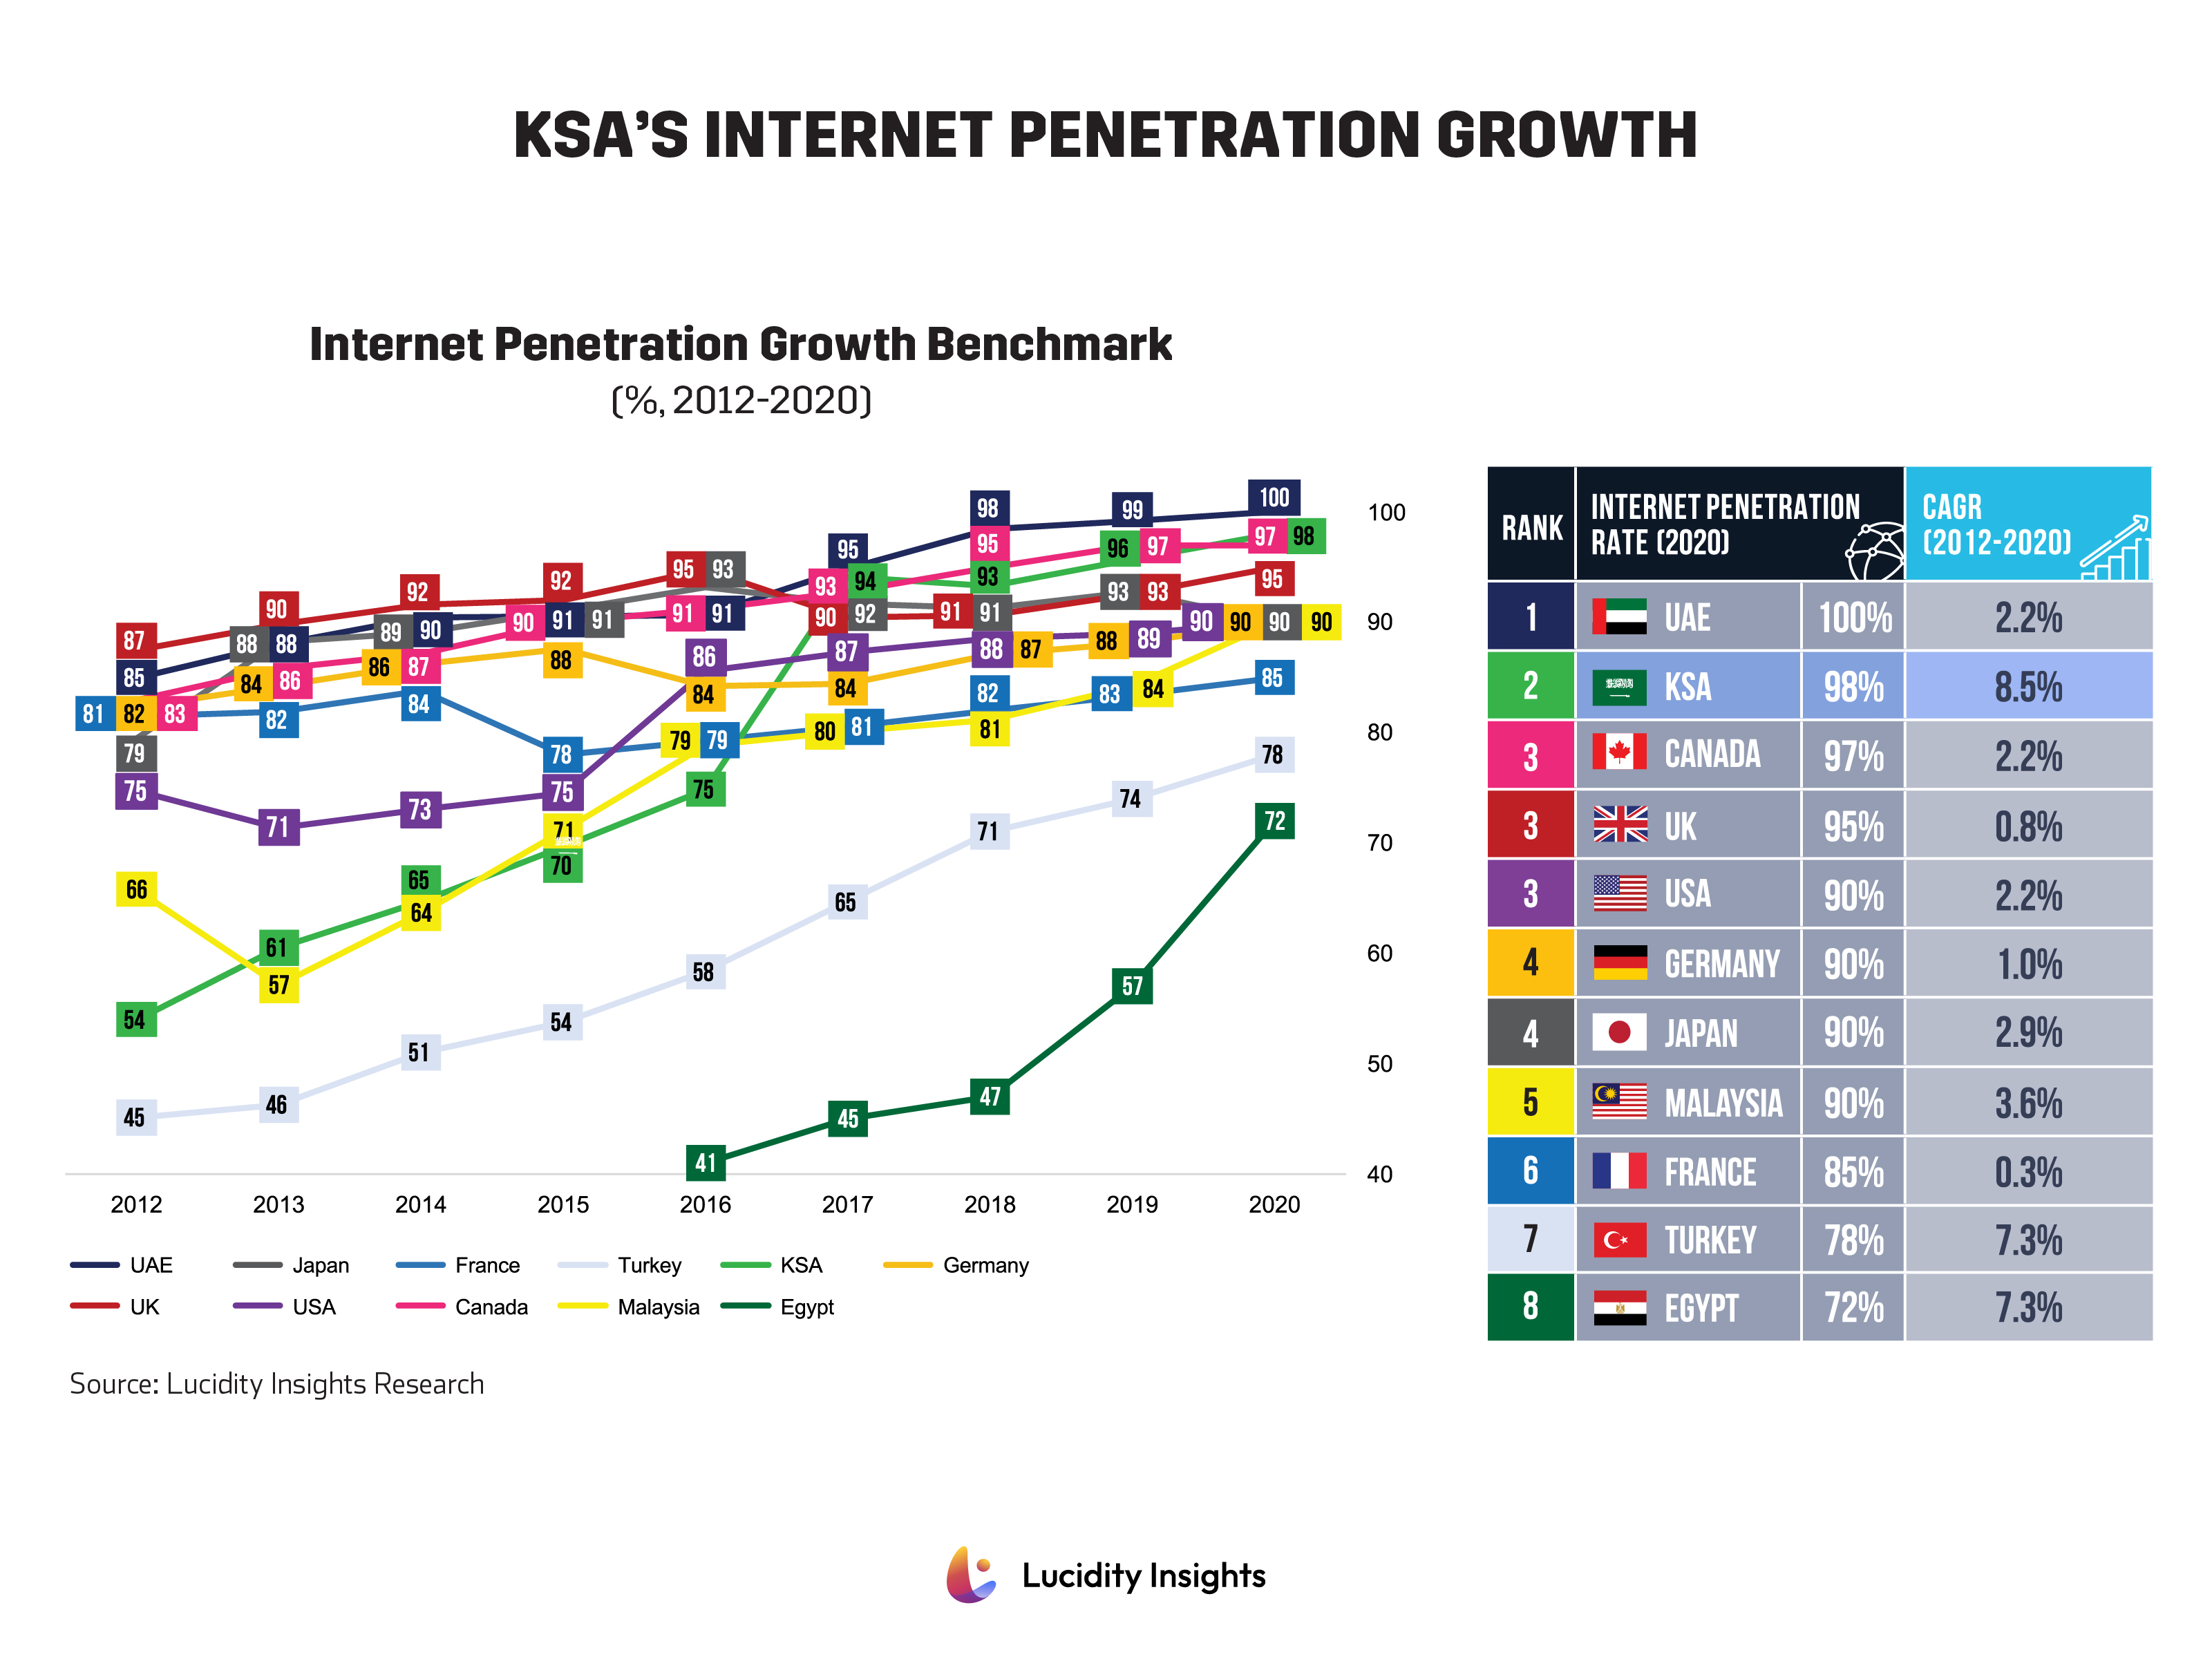 Saudi Arabia's Internet Penetration Rate and Growth Benchmark (2012-2020) Compared to Leading Countries